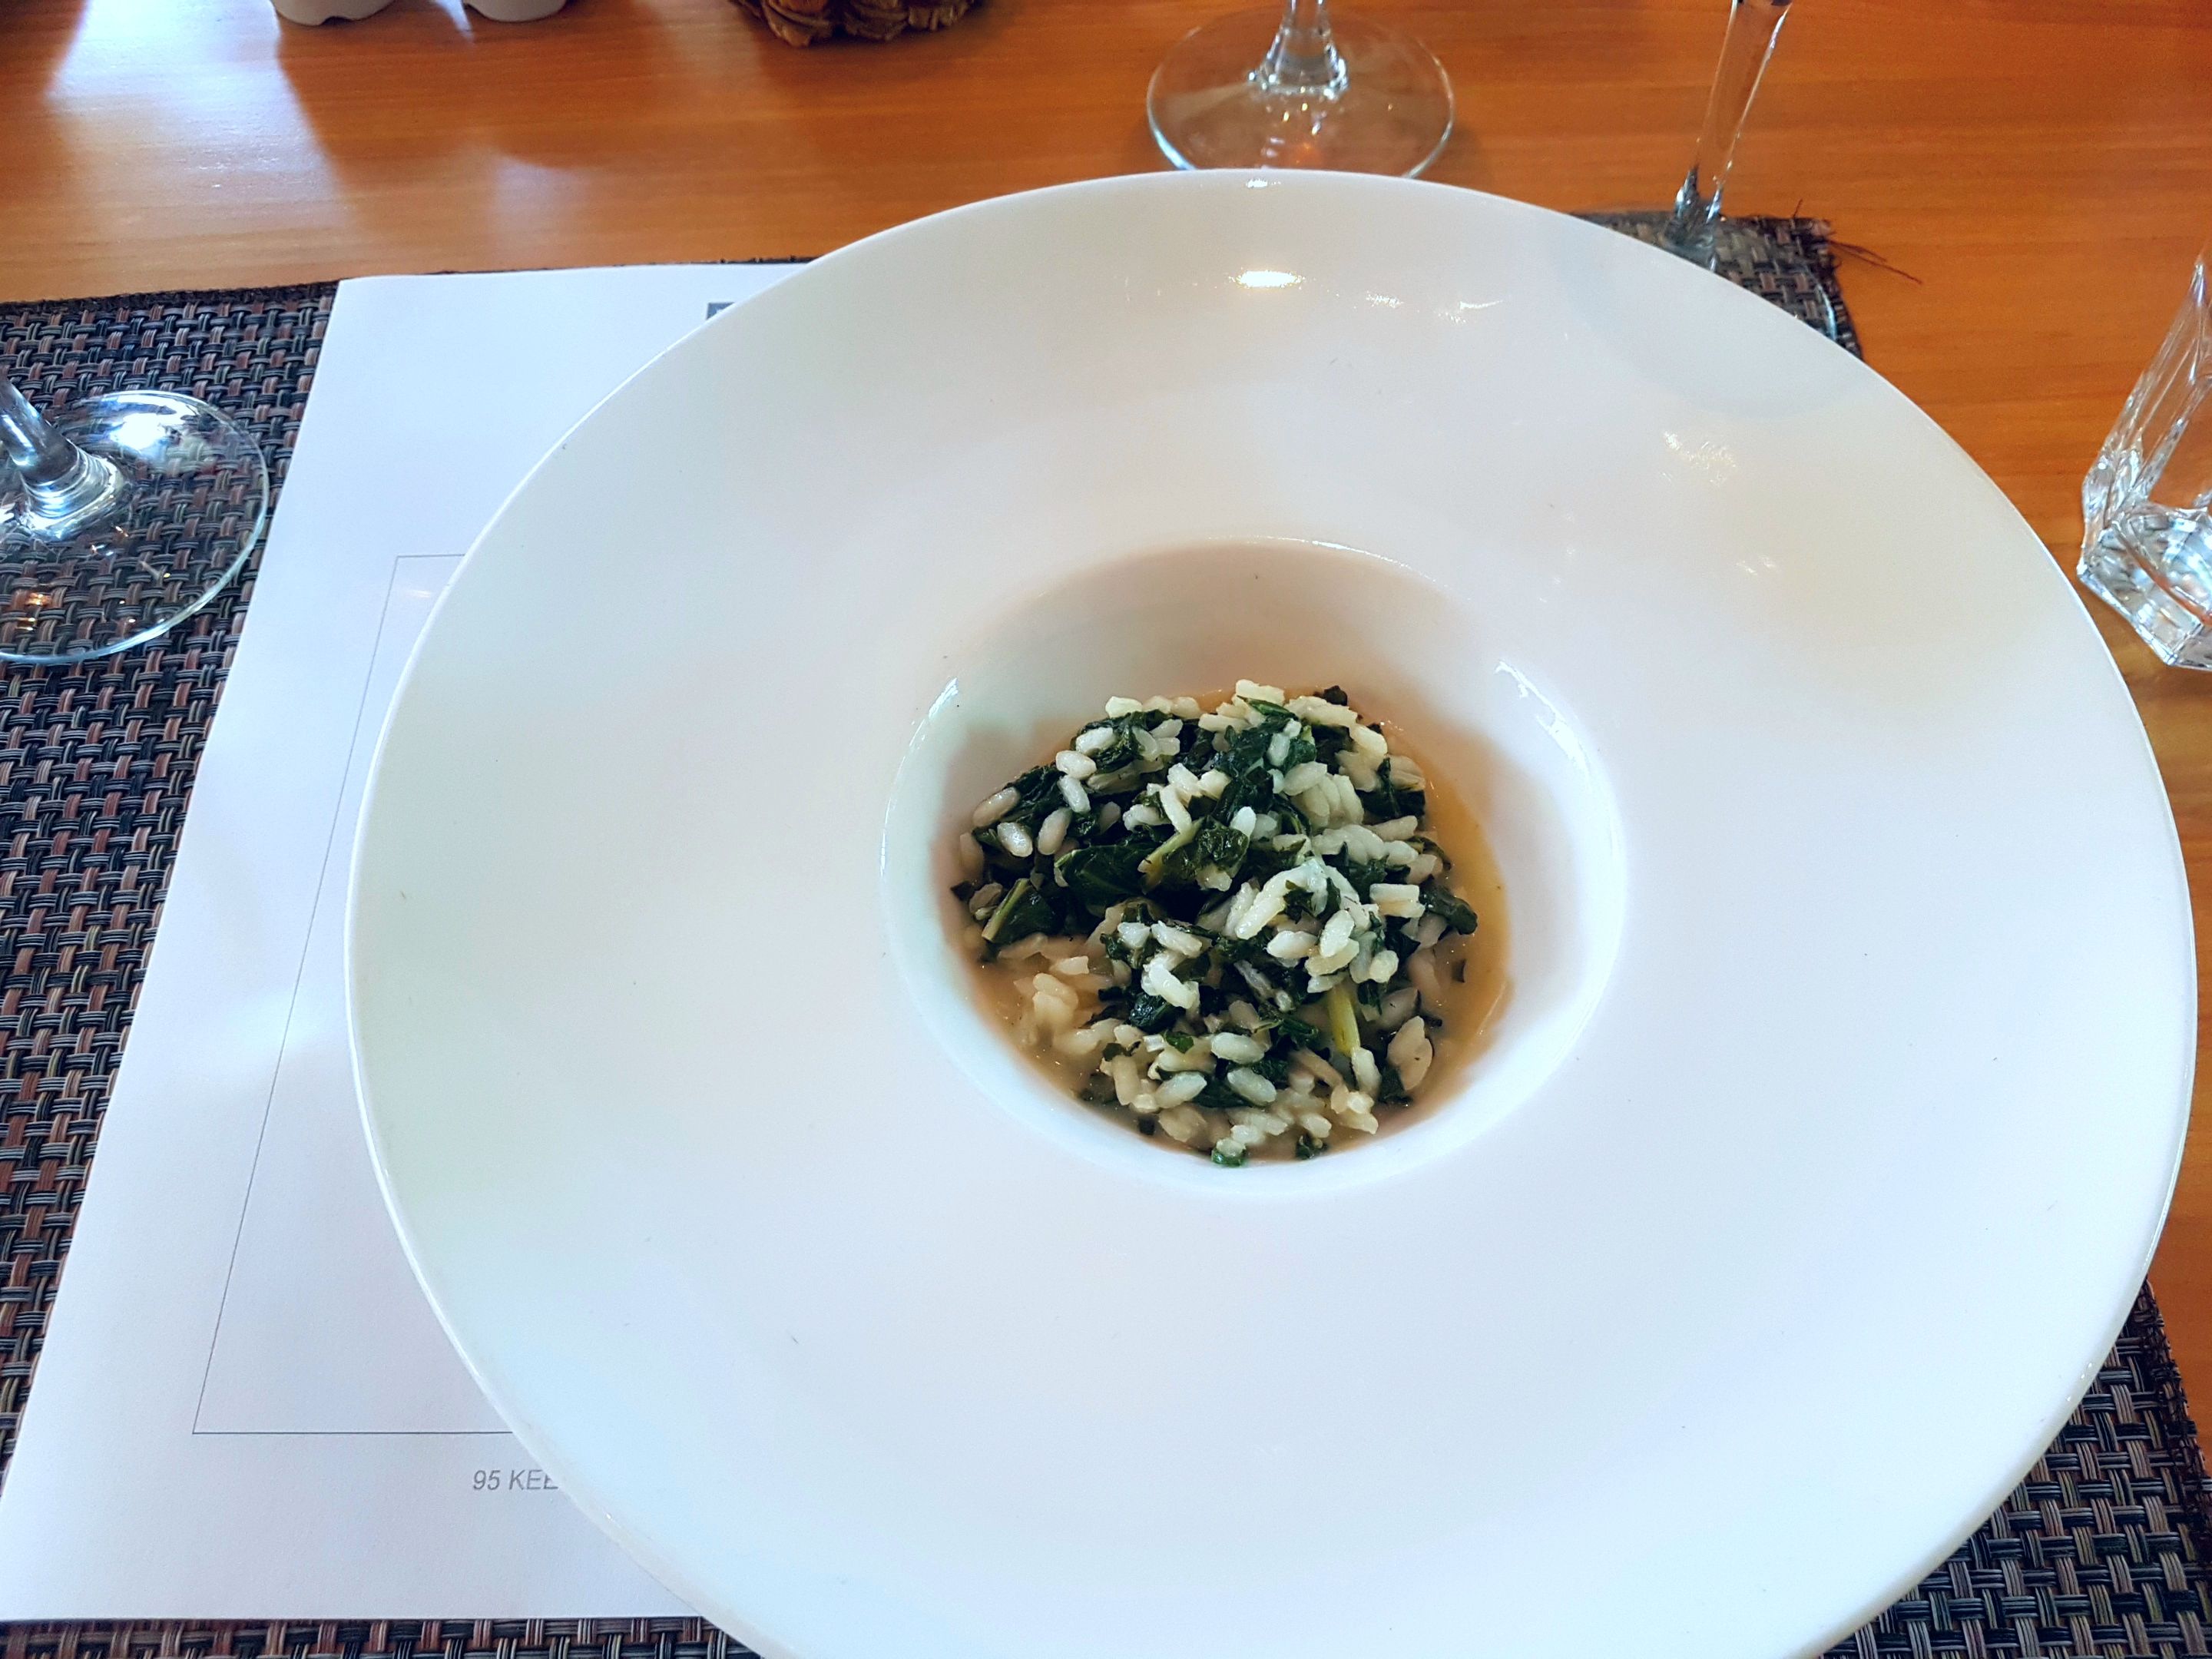 Relish rich risotto at 95 Keerom this Autumn!